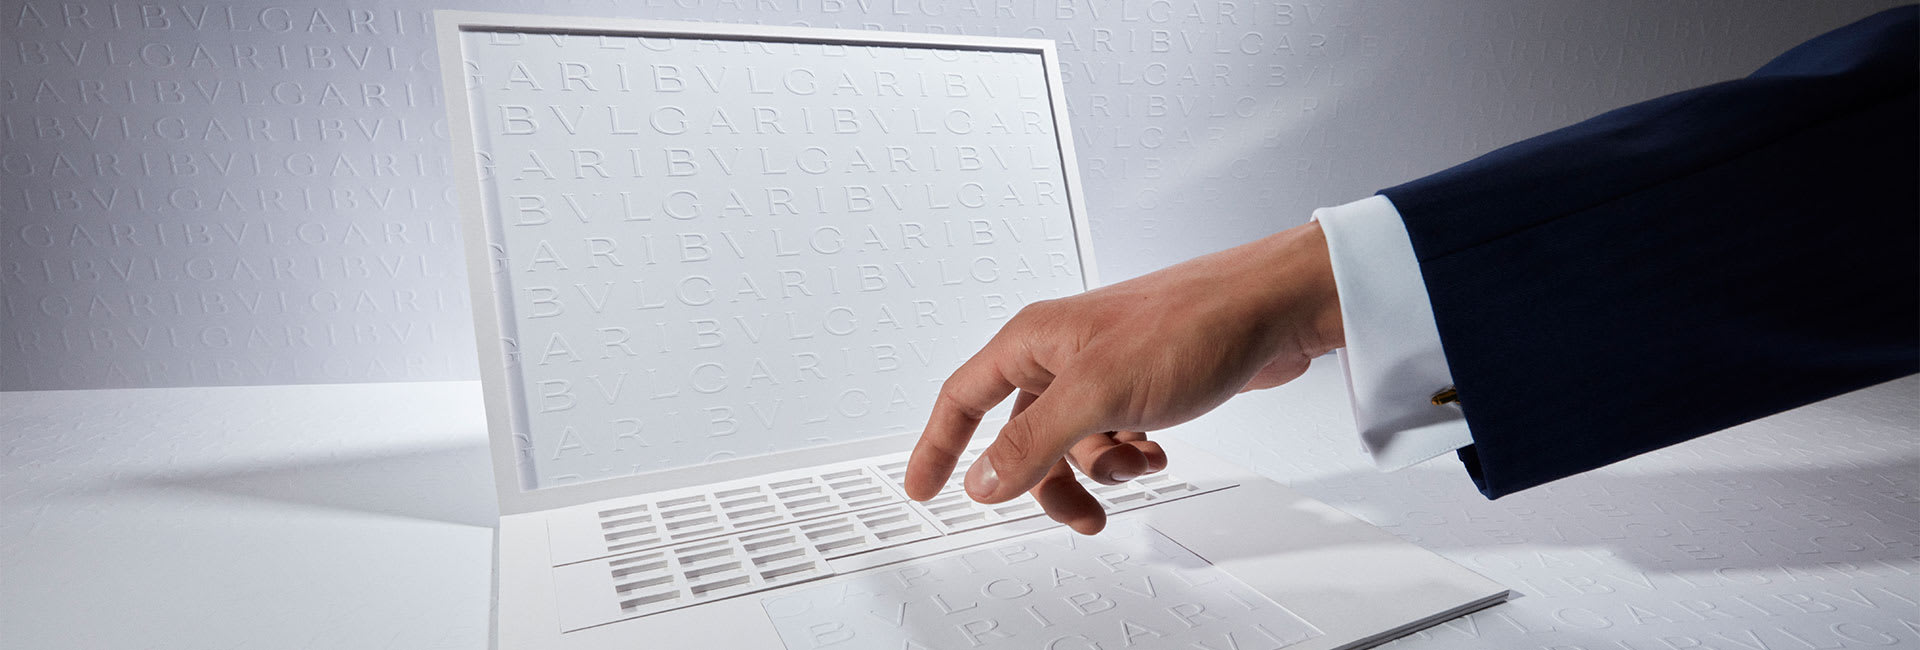 Hand over a laptop with white Bulgari logo backdrop to represent the Click & Collect service.